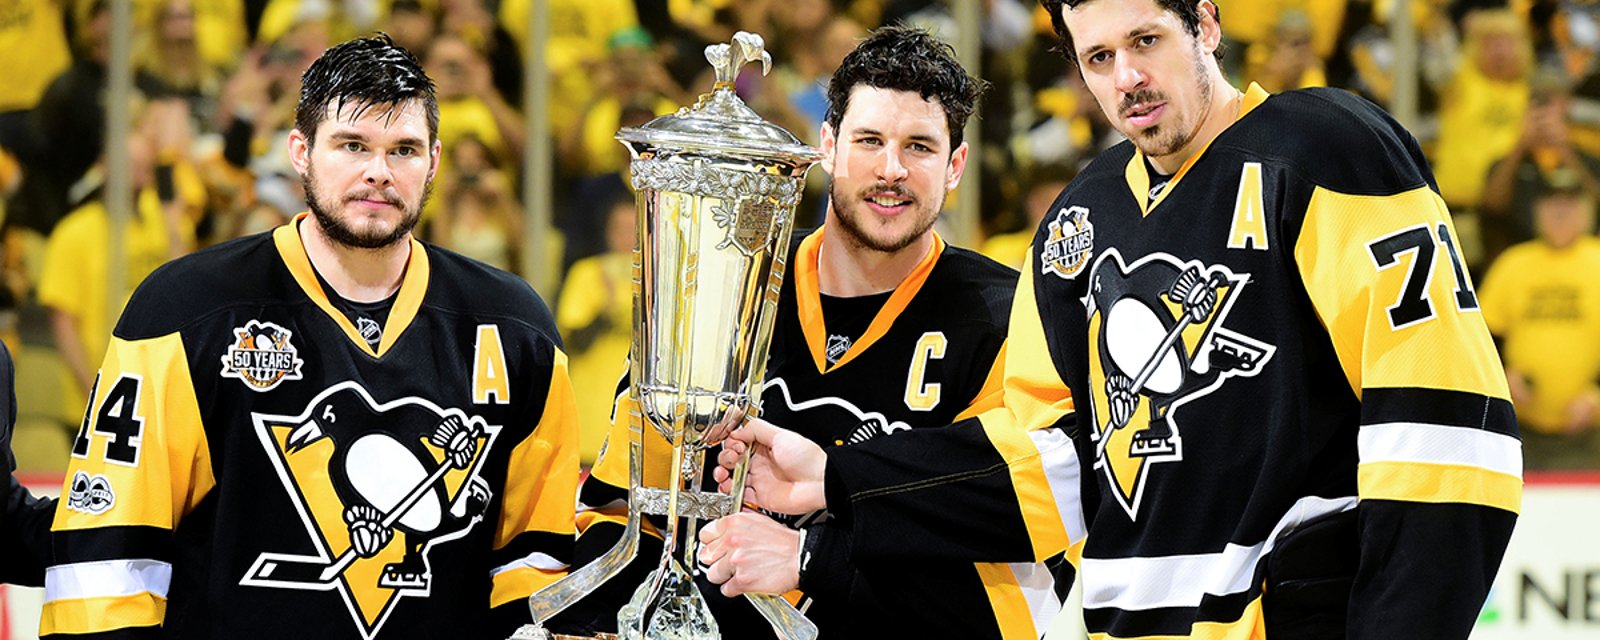 Your Call: Do the Penguins have a leadership problem?